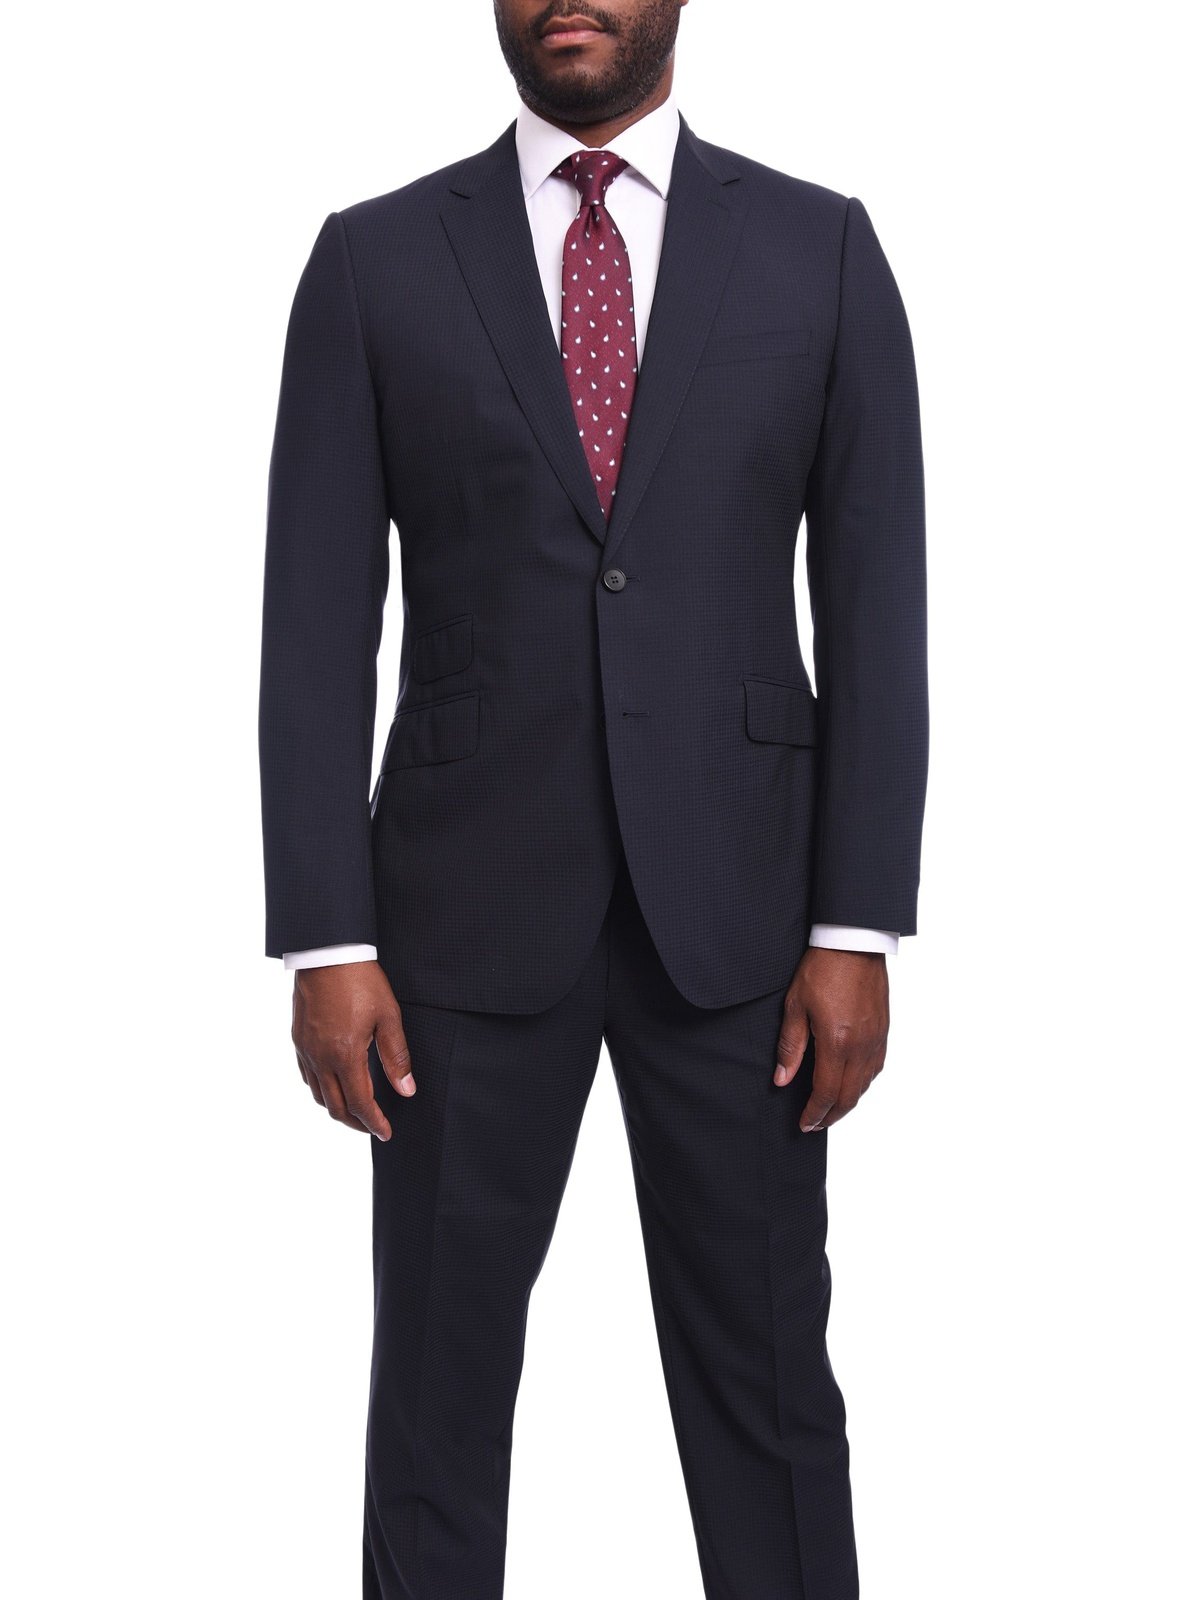 Napoli TWO PIECE SUITS Napoli Slim Fit Navy Blue Tonal Check Half Canvassed Marzotto Wool Suit